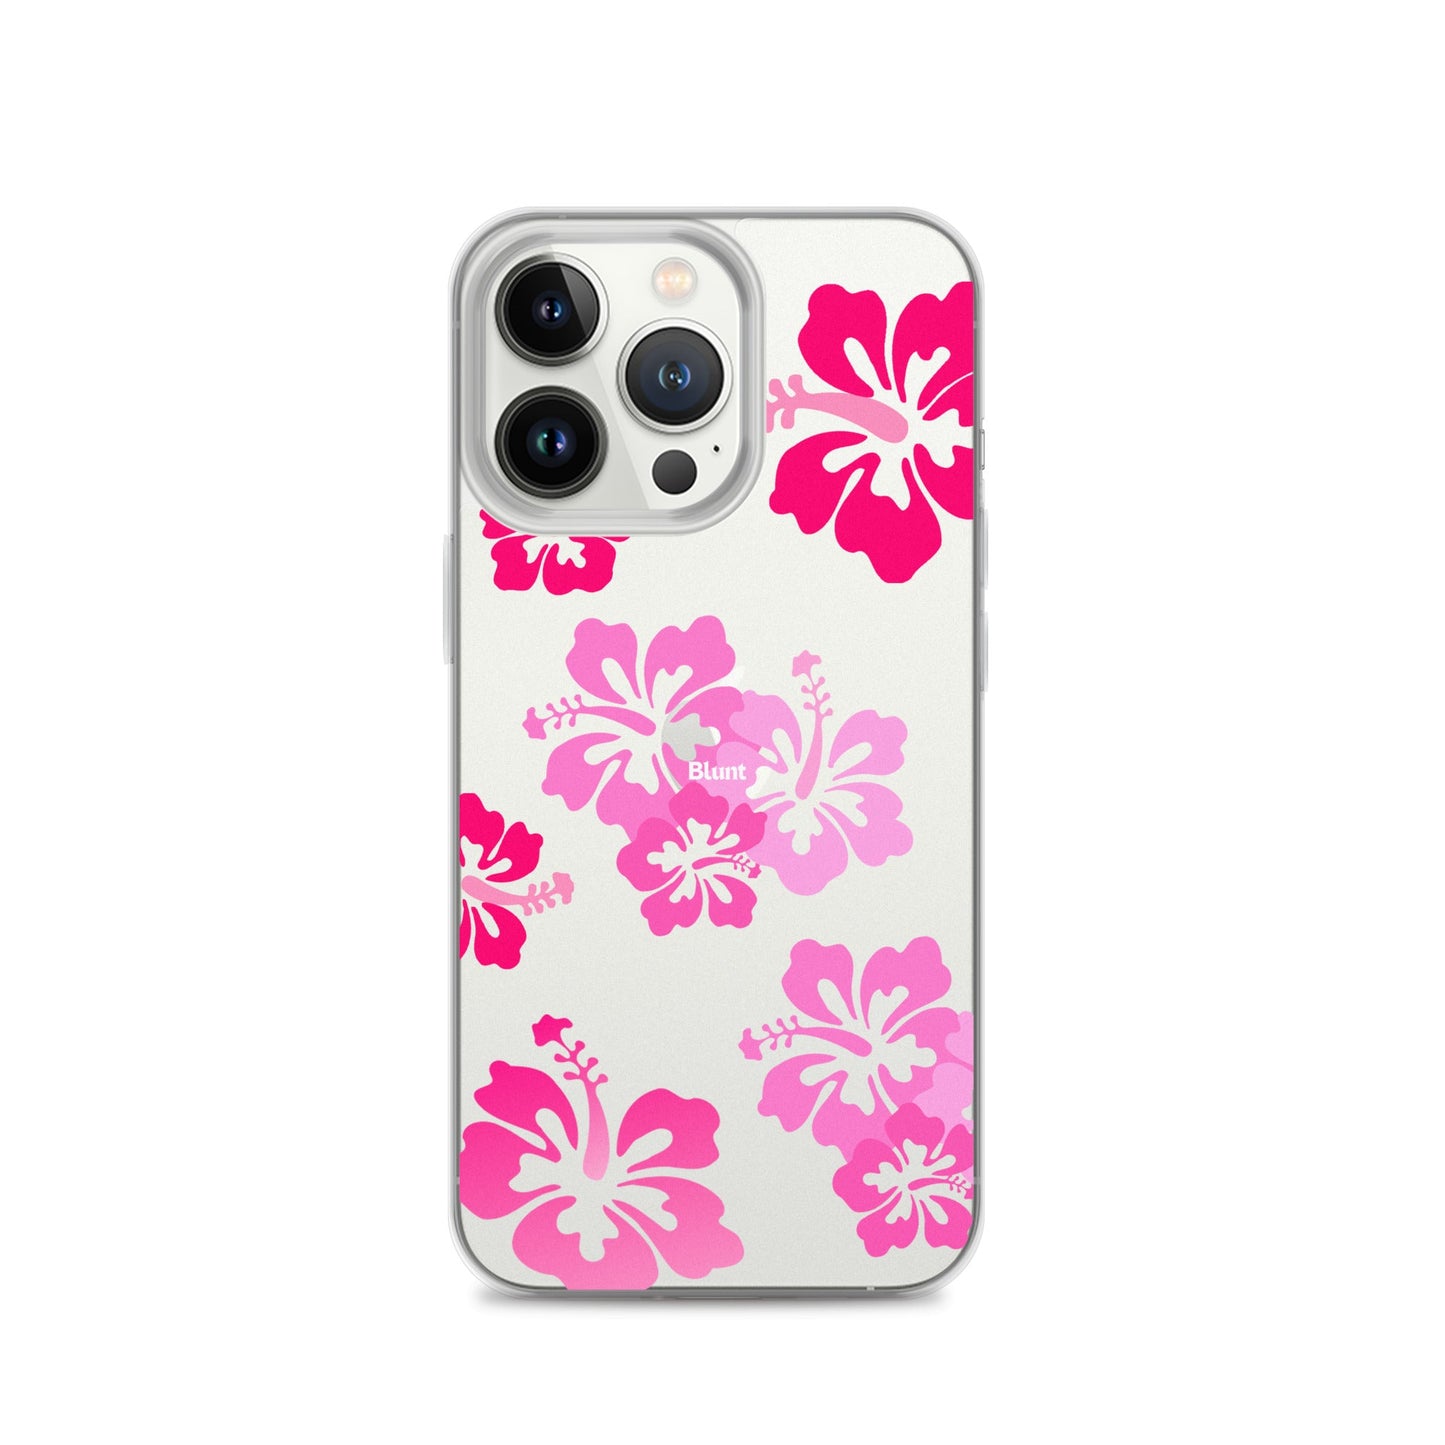 Layla iPhone Case - blunt cases